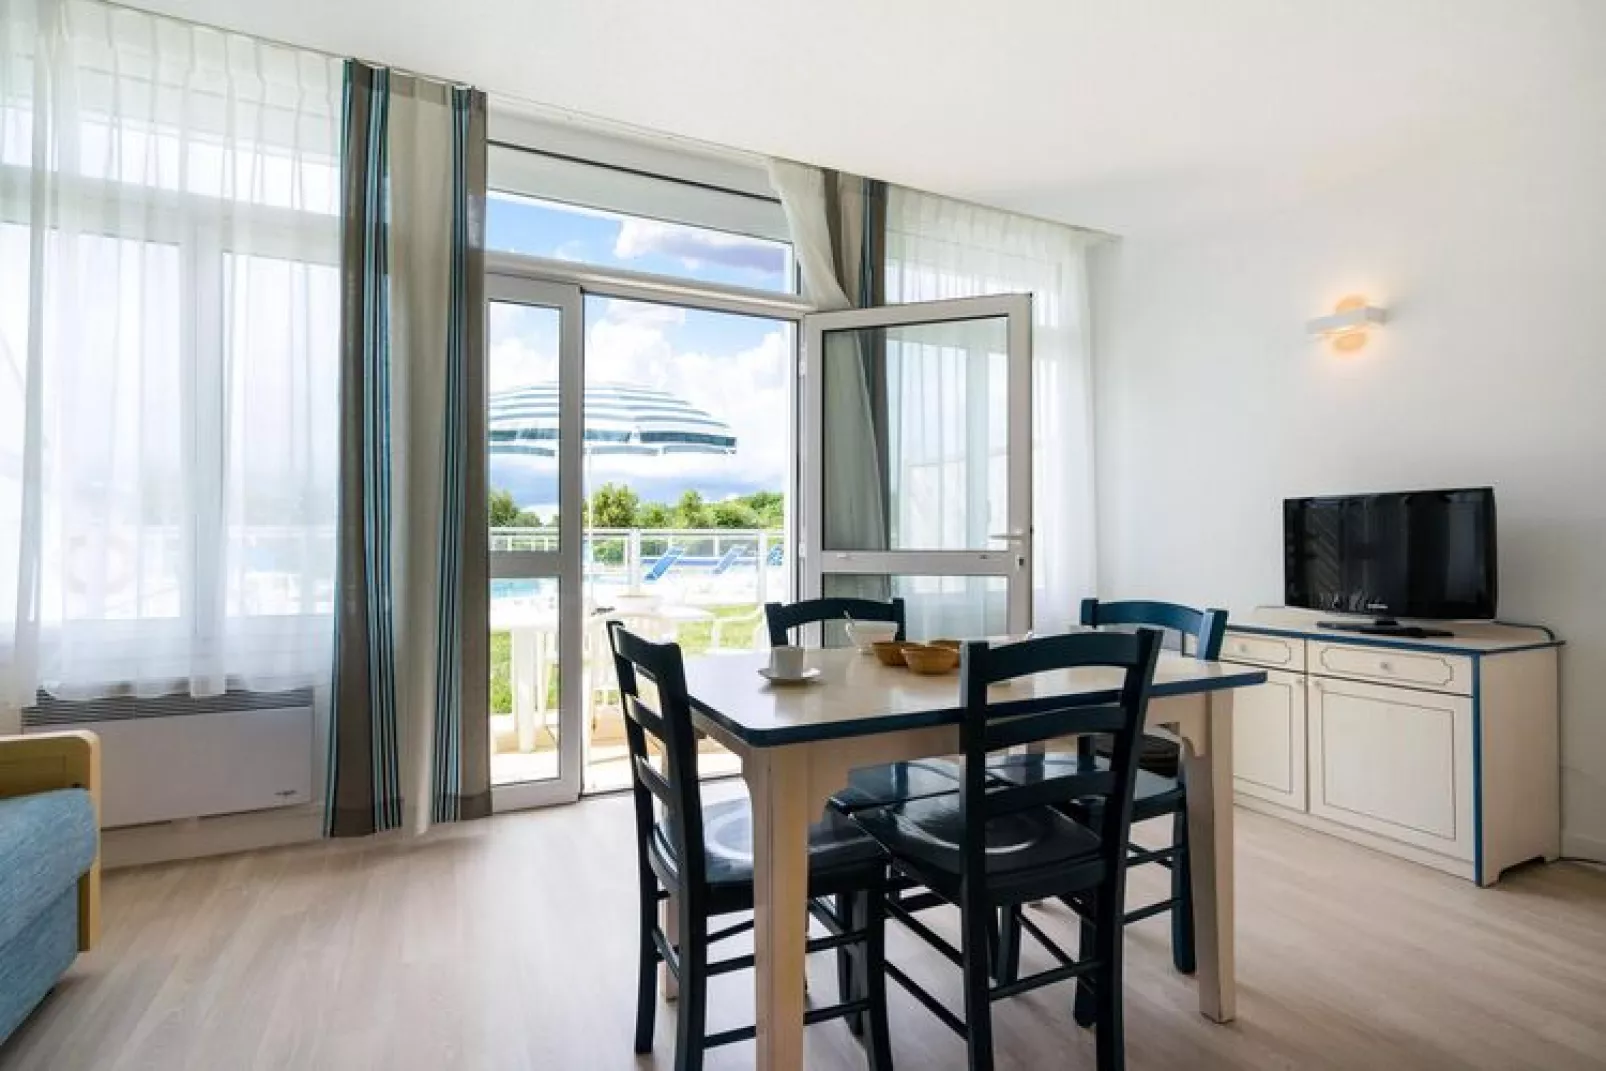 Residence La Voile d'Or L'Ile-aux-Moines  -  OVO26 -App Standard 6 p - Terr ou balcon - Apt 5 pers - 1 chambre-Woonkamer